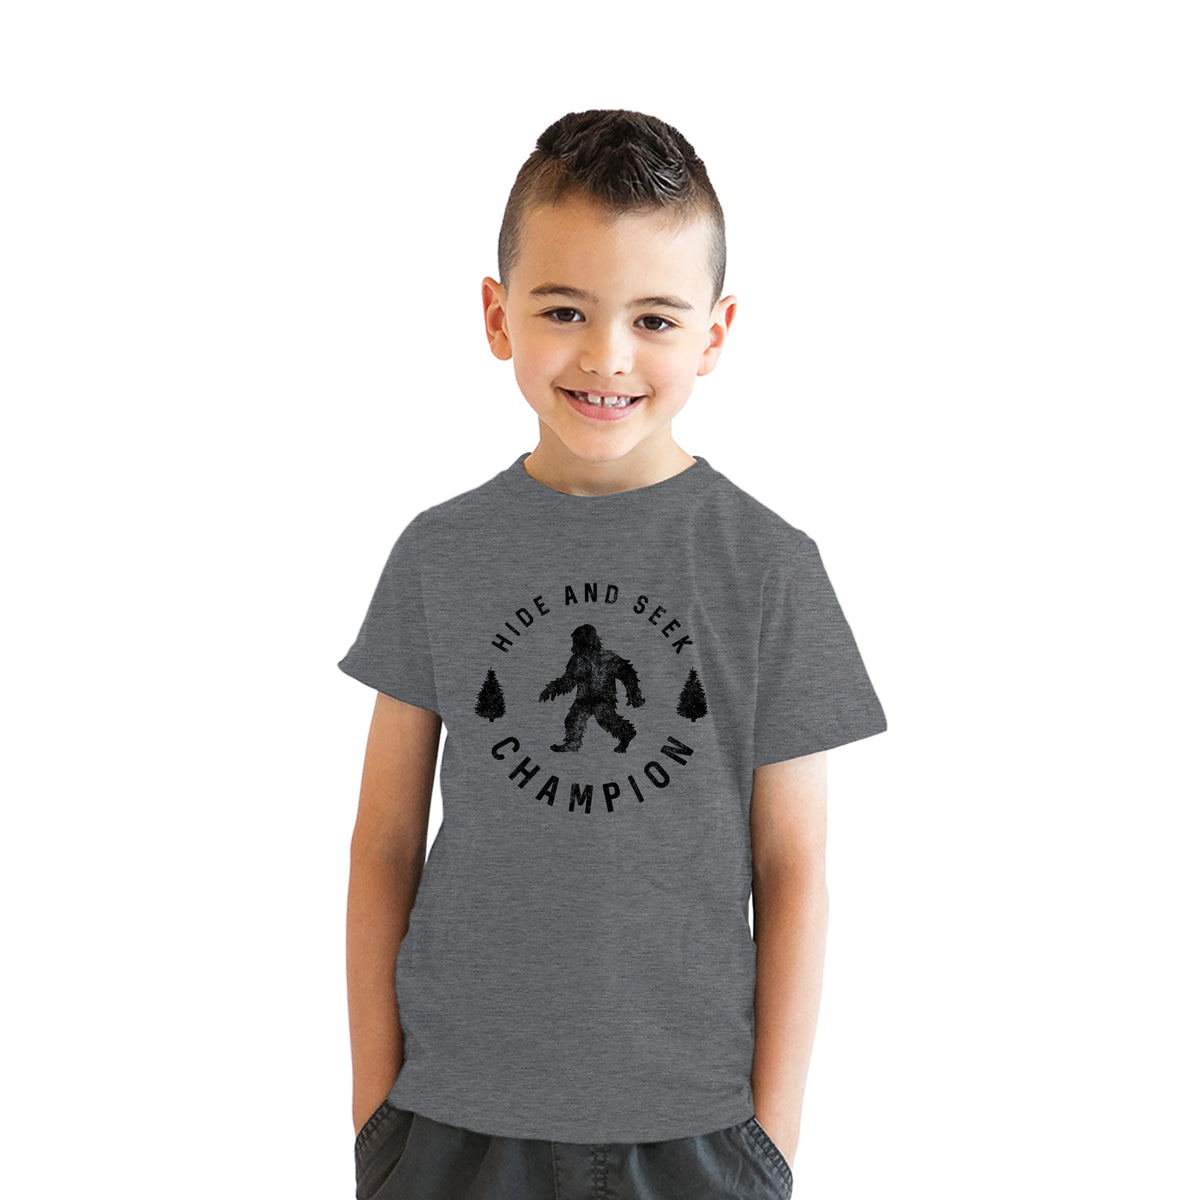 Hide And Seek Champion Youth T Shirt